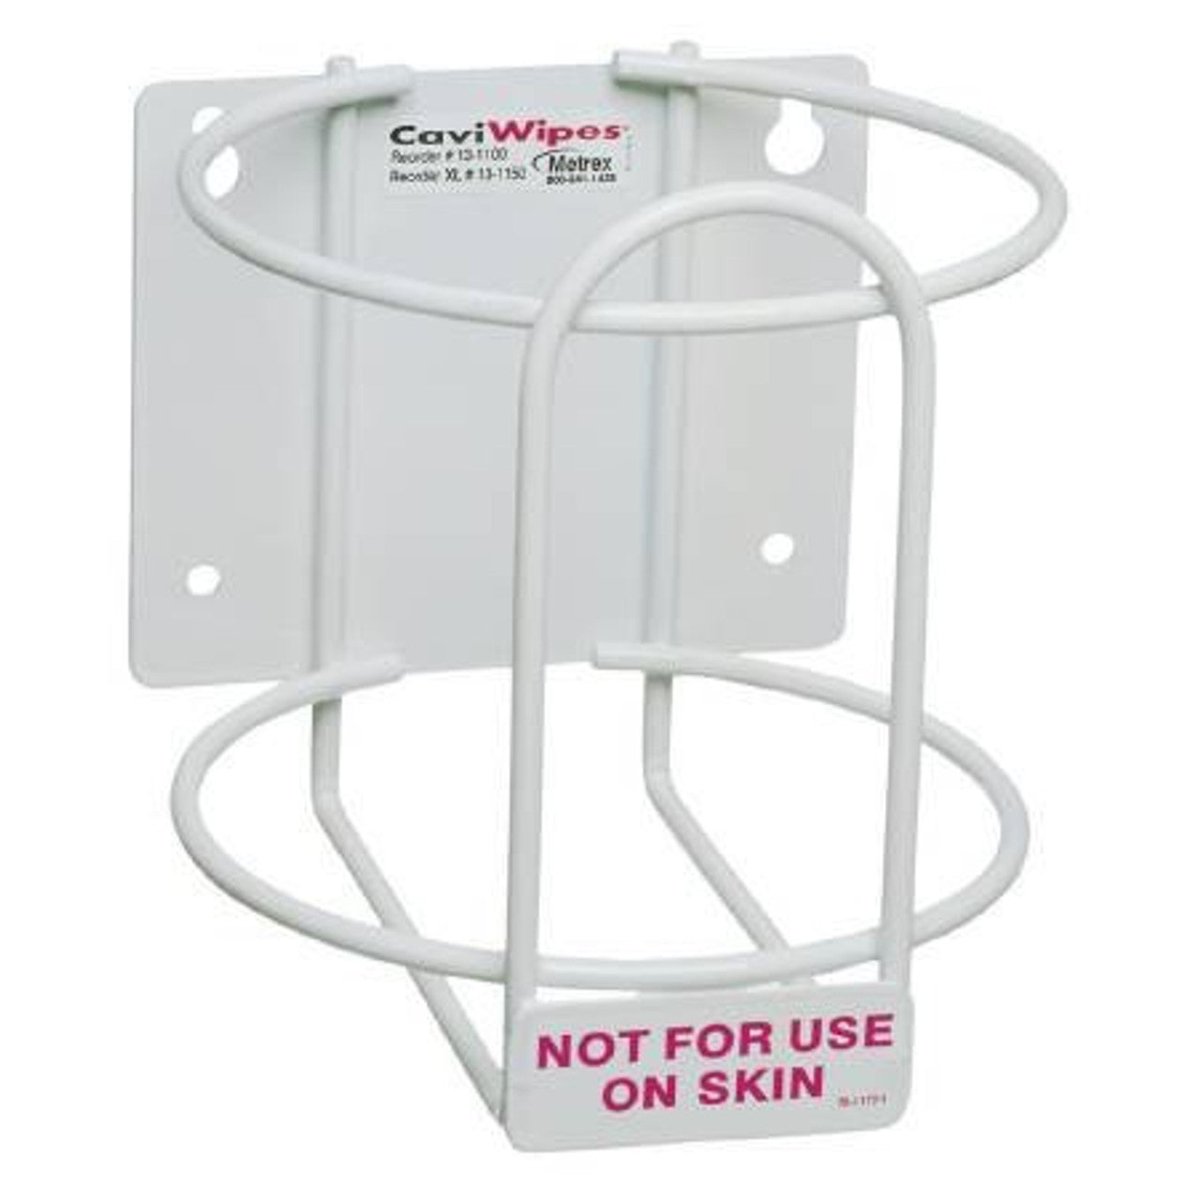 CaviWipes Wall Mount Bracket for Wipes Canister